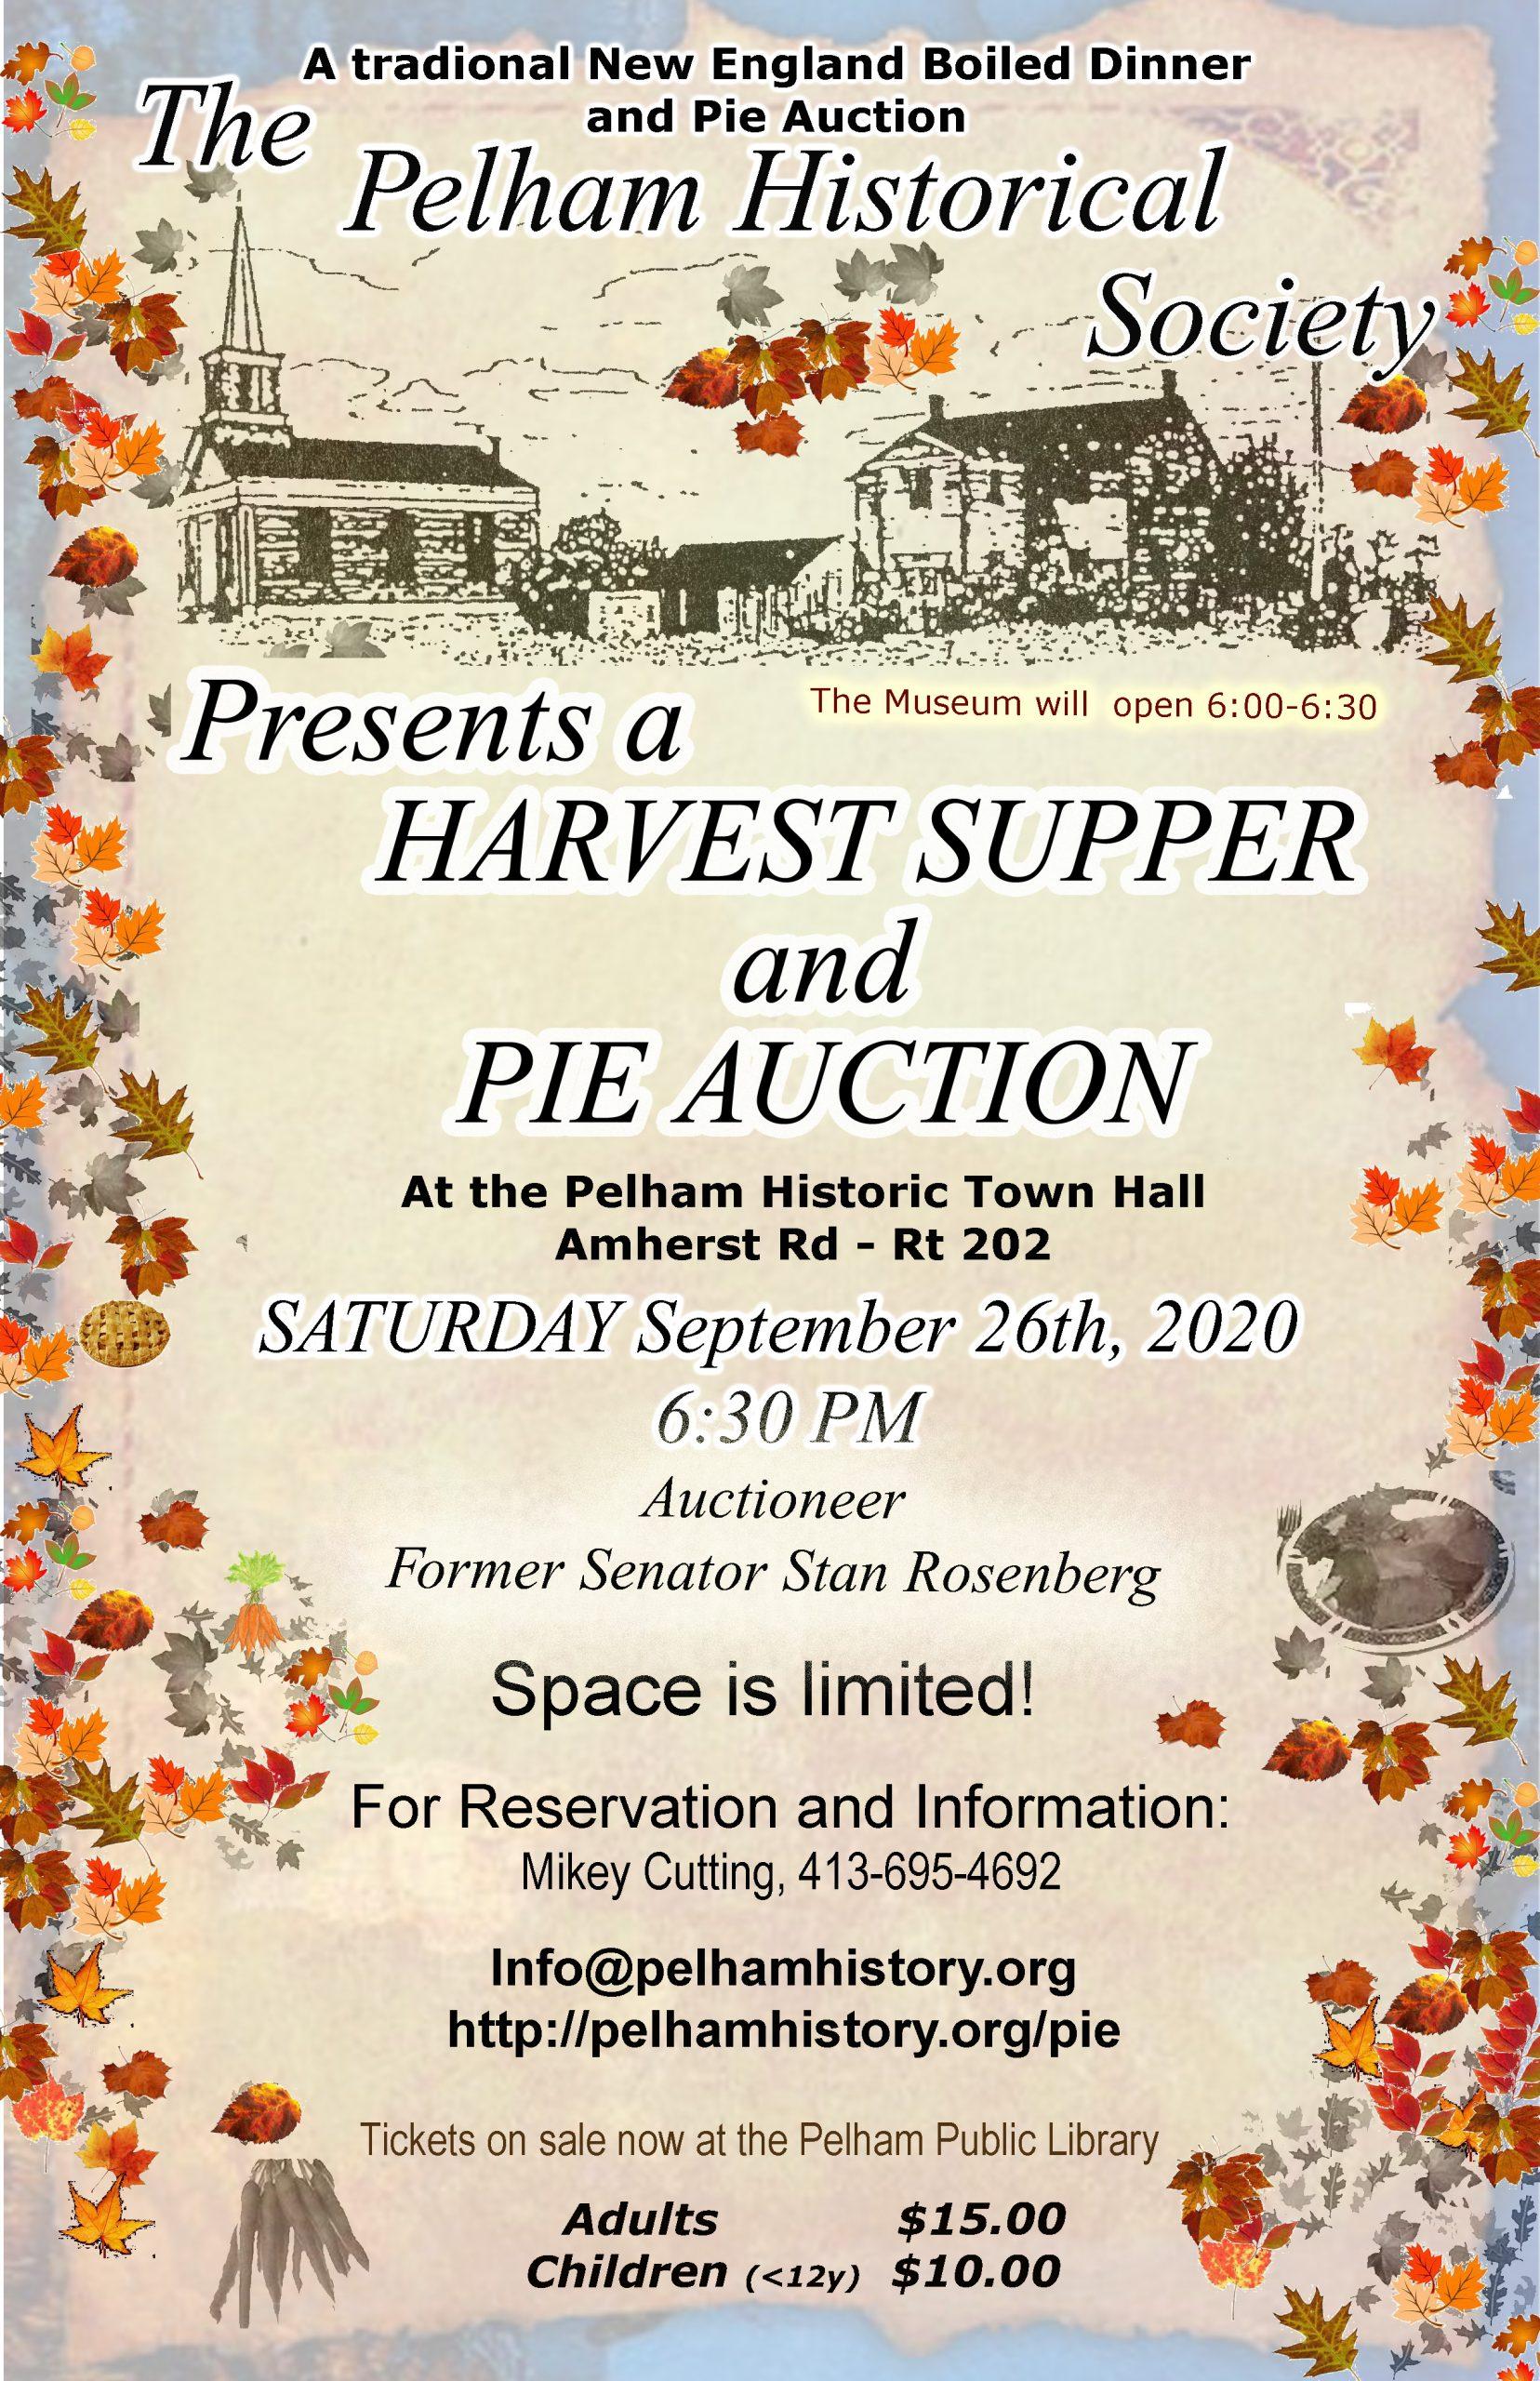 Harvest Supper and Howard D. Barnes Memorial Pie Auction